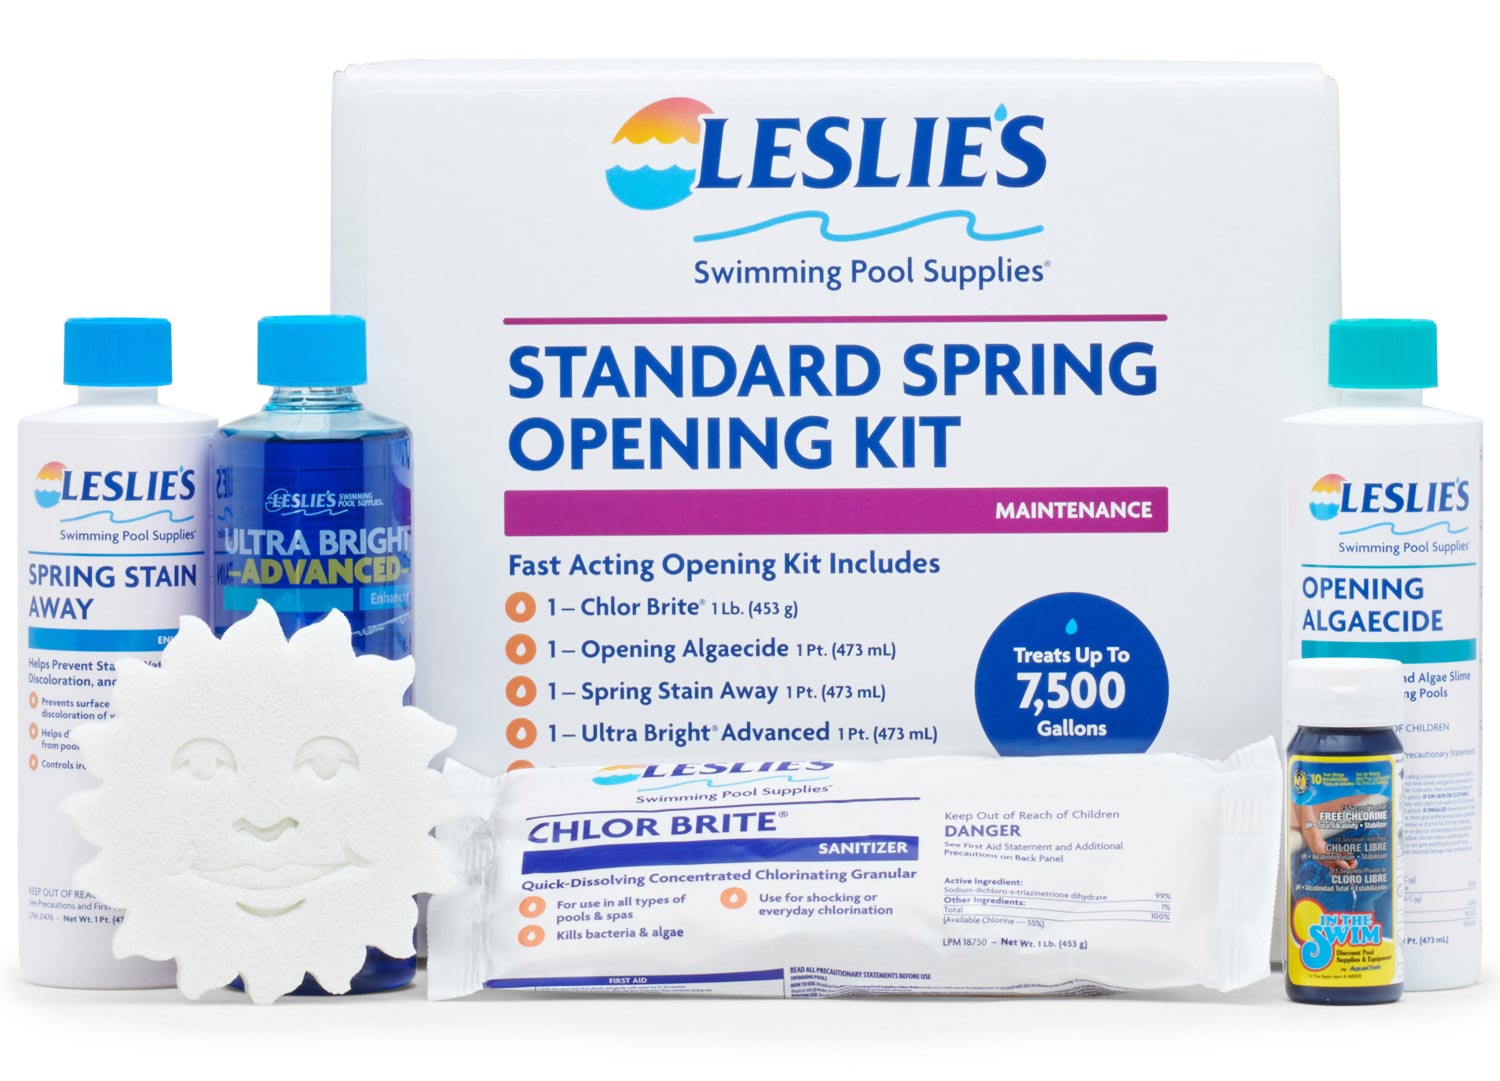 Leslie's Standard Spring Pool Opening Kit Contents